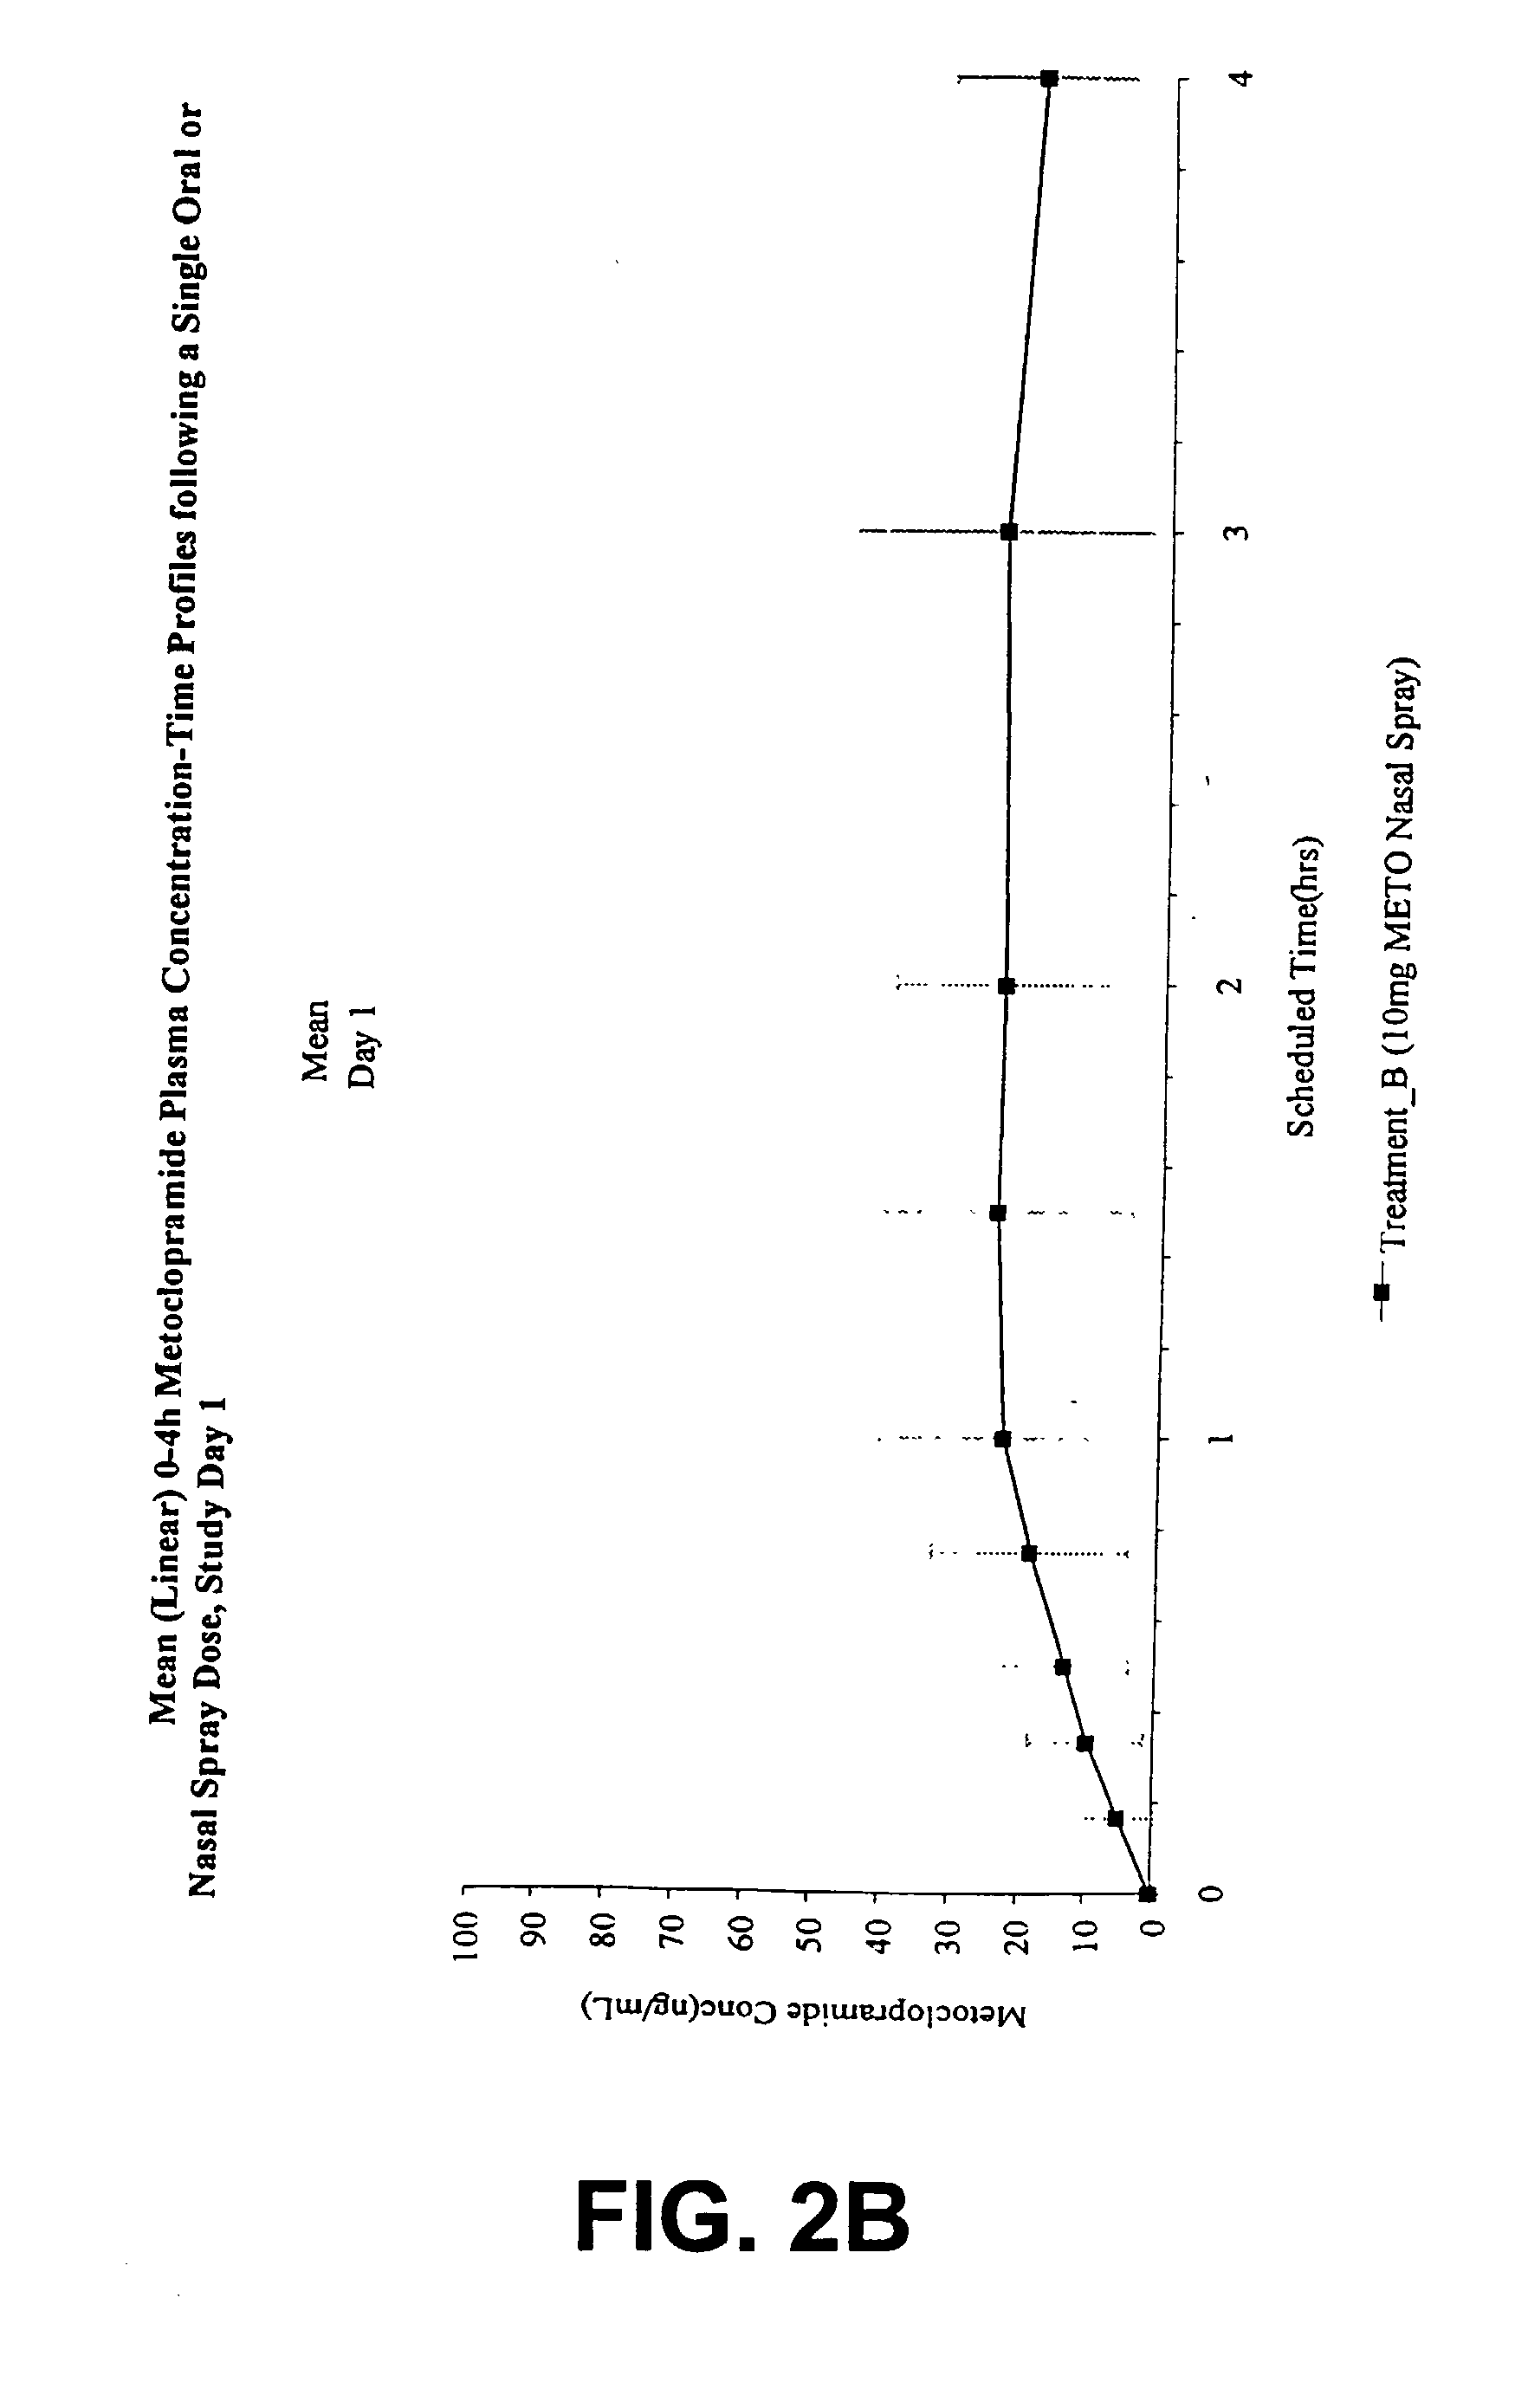 Nasal administration of agents for the treatment of gastroparesis